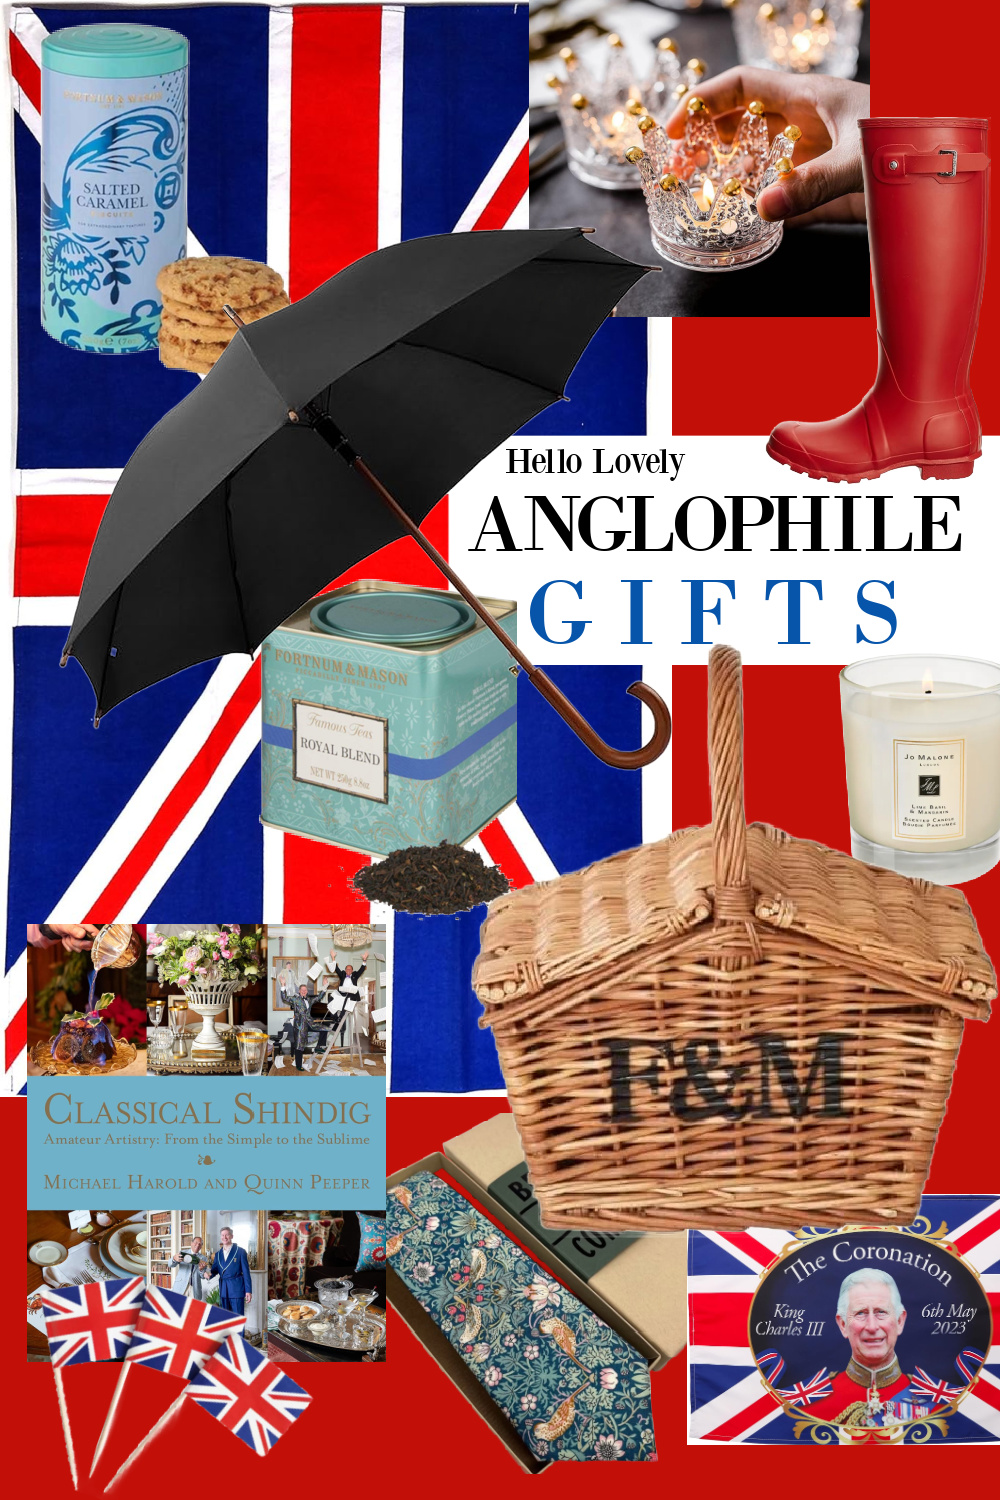 Anglophile gifts - Hello Lovely gift guide for anglophiles with a few British and London inspired favorites. #anglophilegifts #giftguide #UKgifts